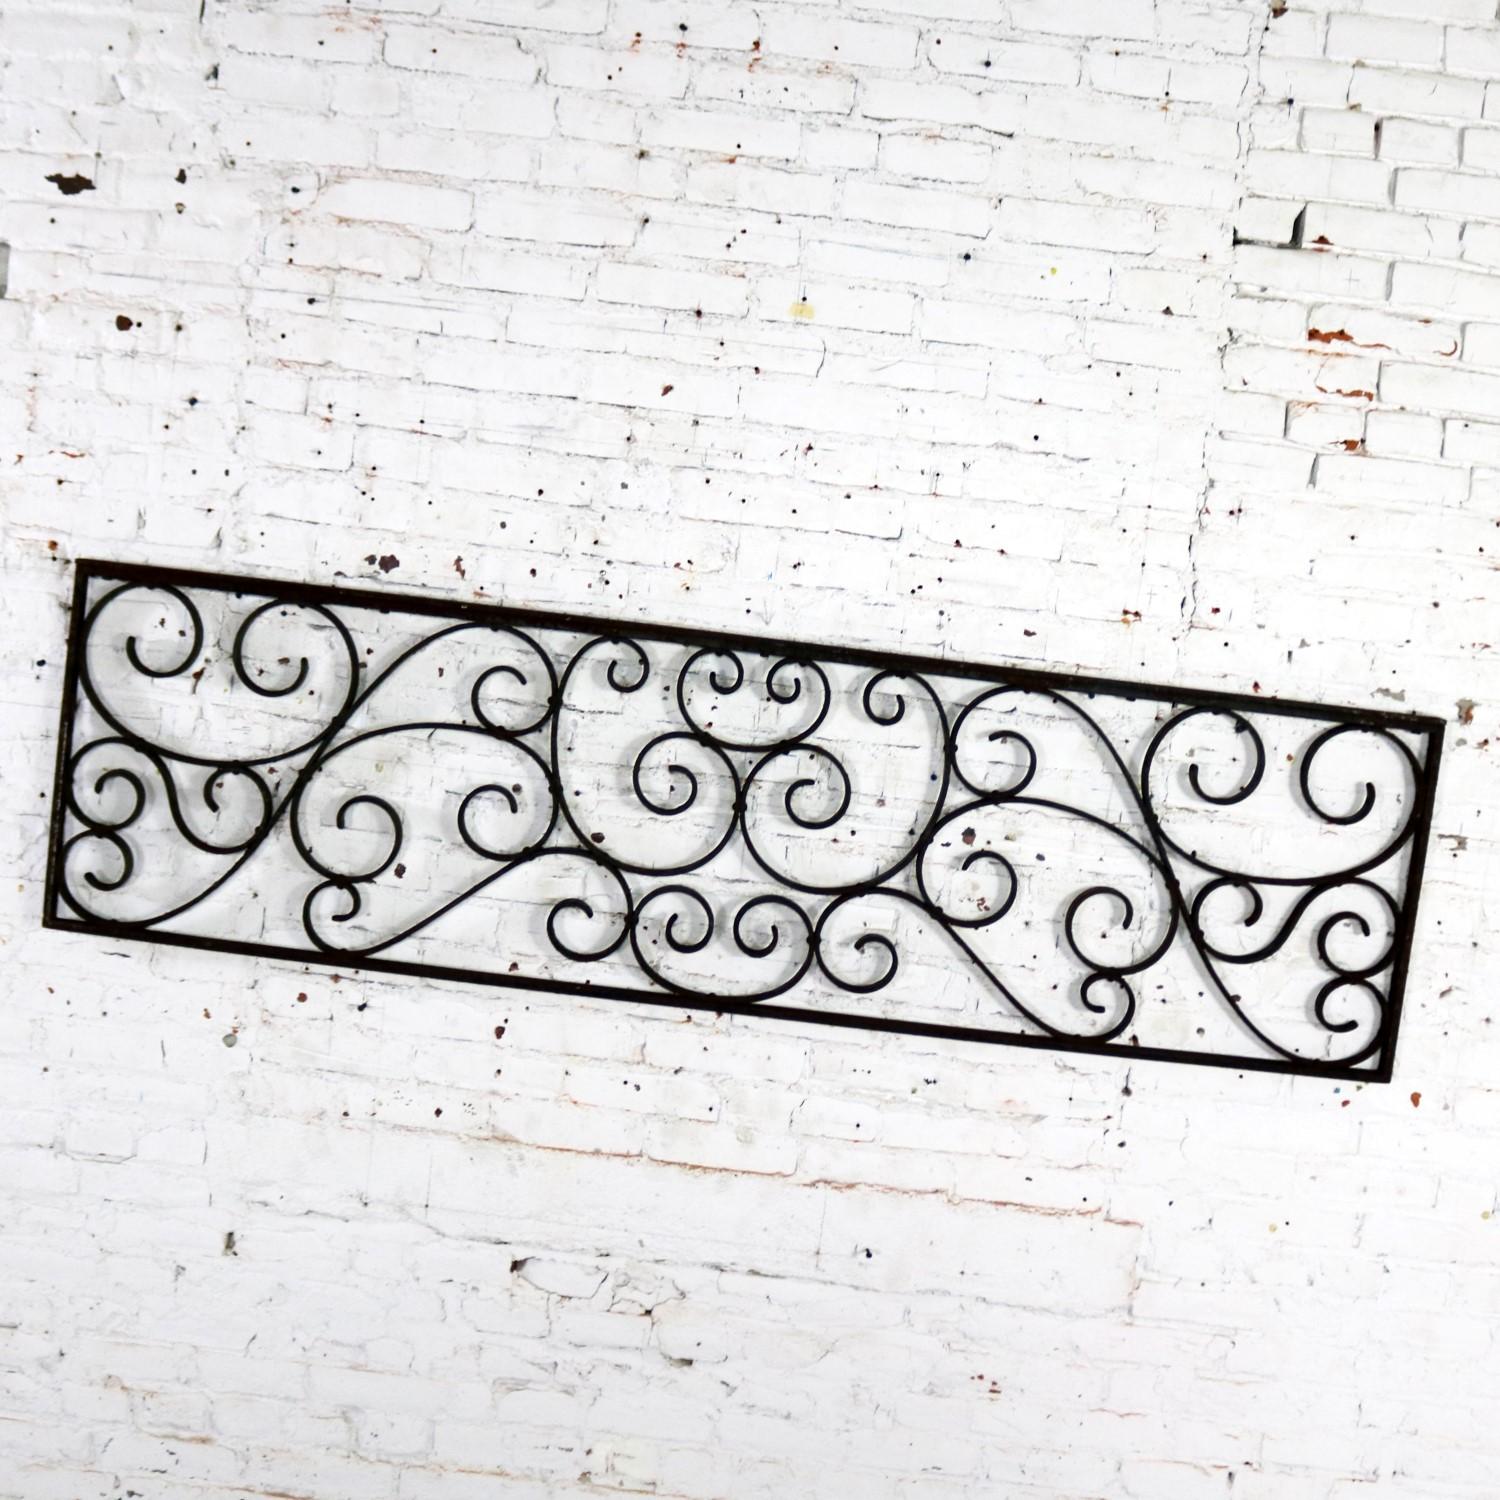 Other Antique Swirled Design Wrought Iron Railing Piece Trellis or Fence Section For Sale